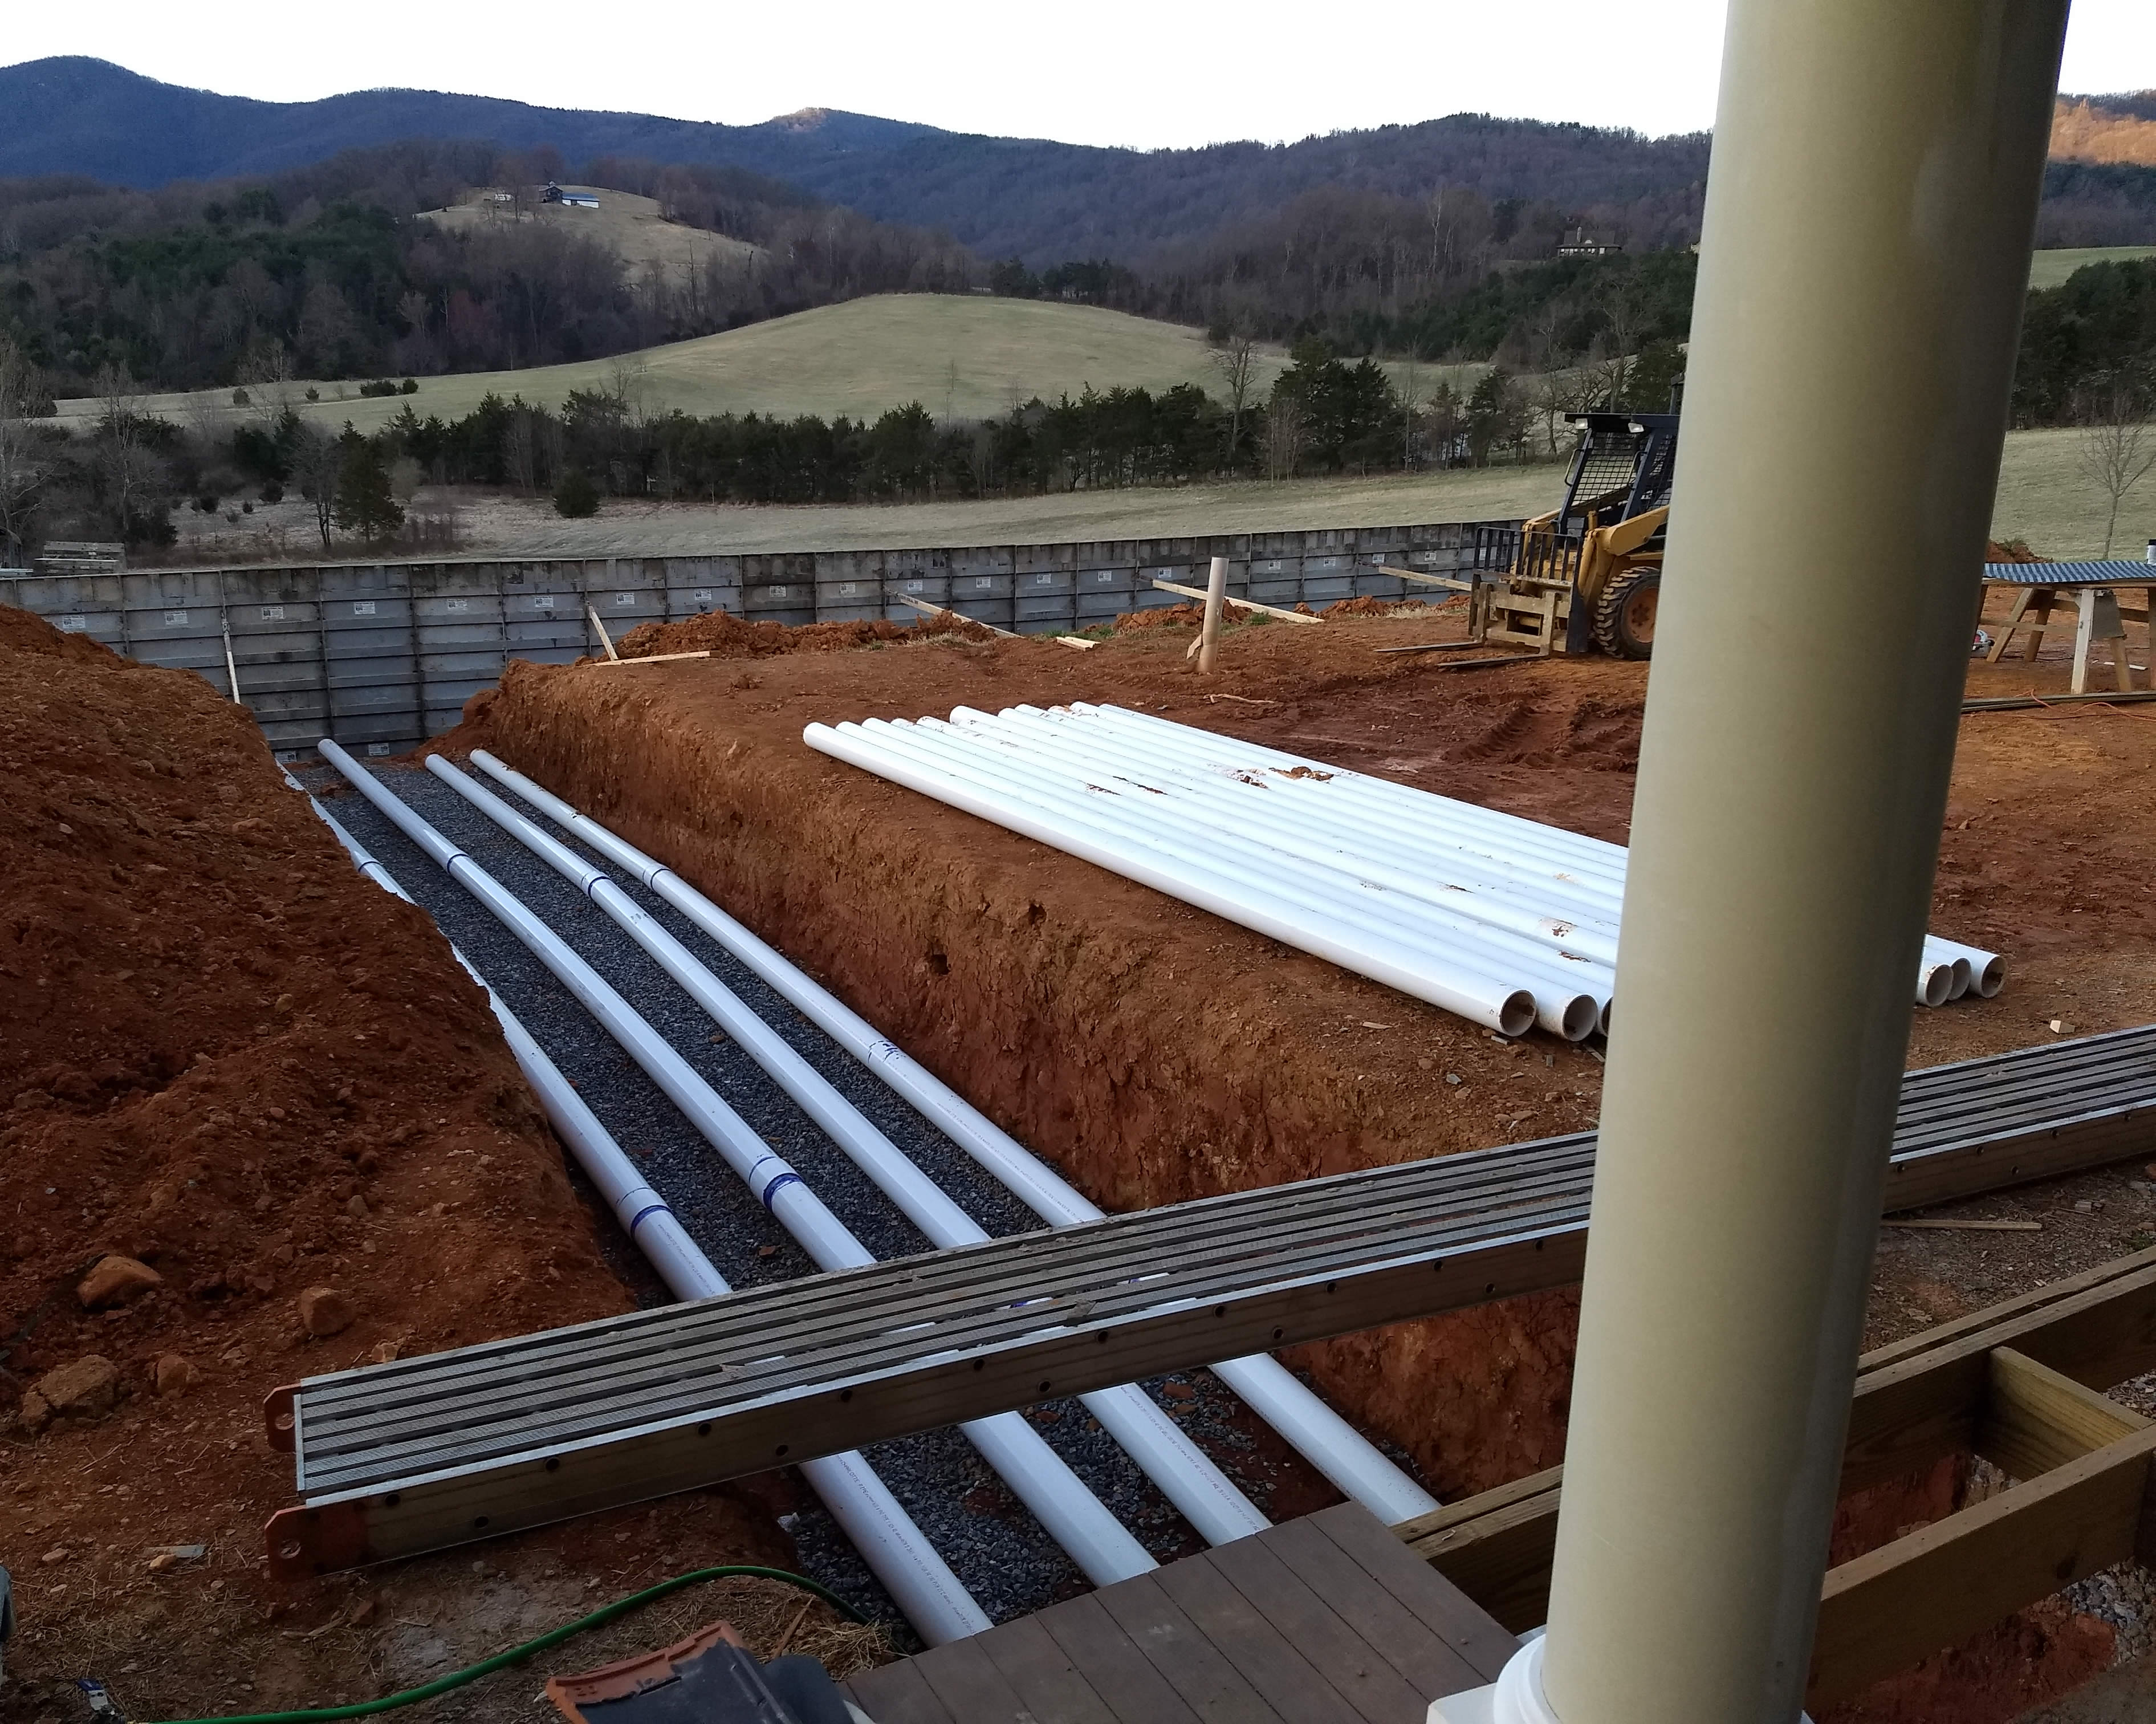 28 March 2019 - Beginning to lay conduit for the HVAC (heating and cooling system)